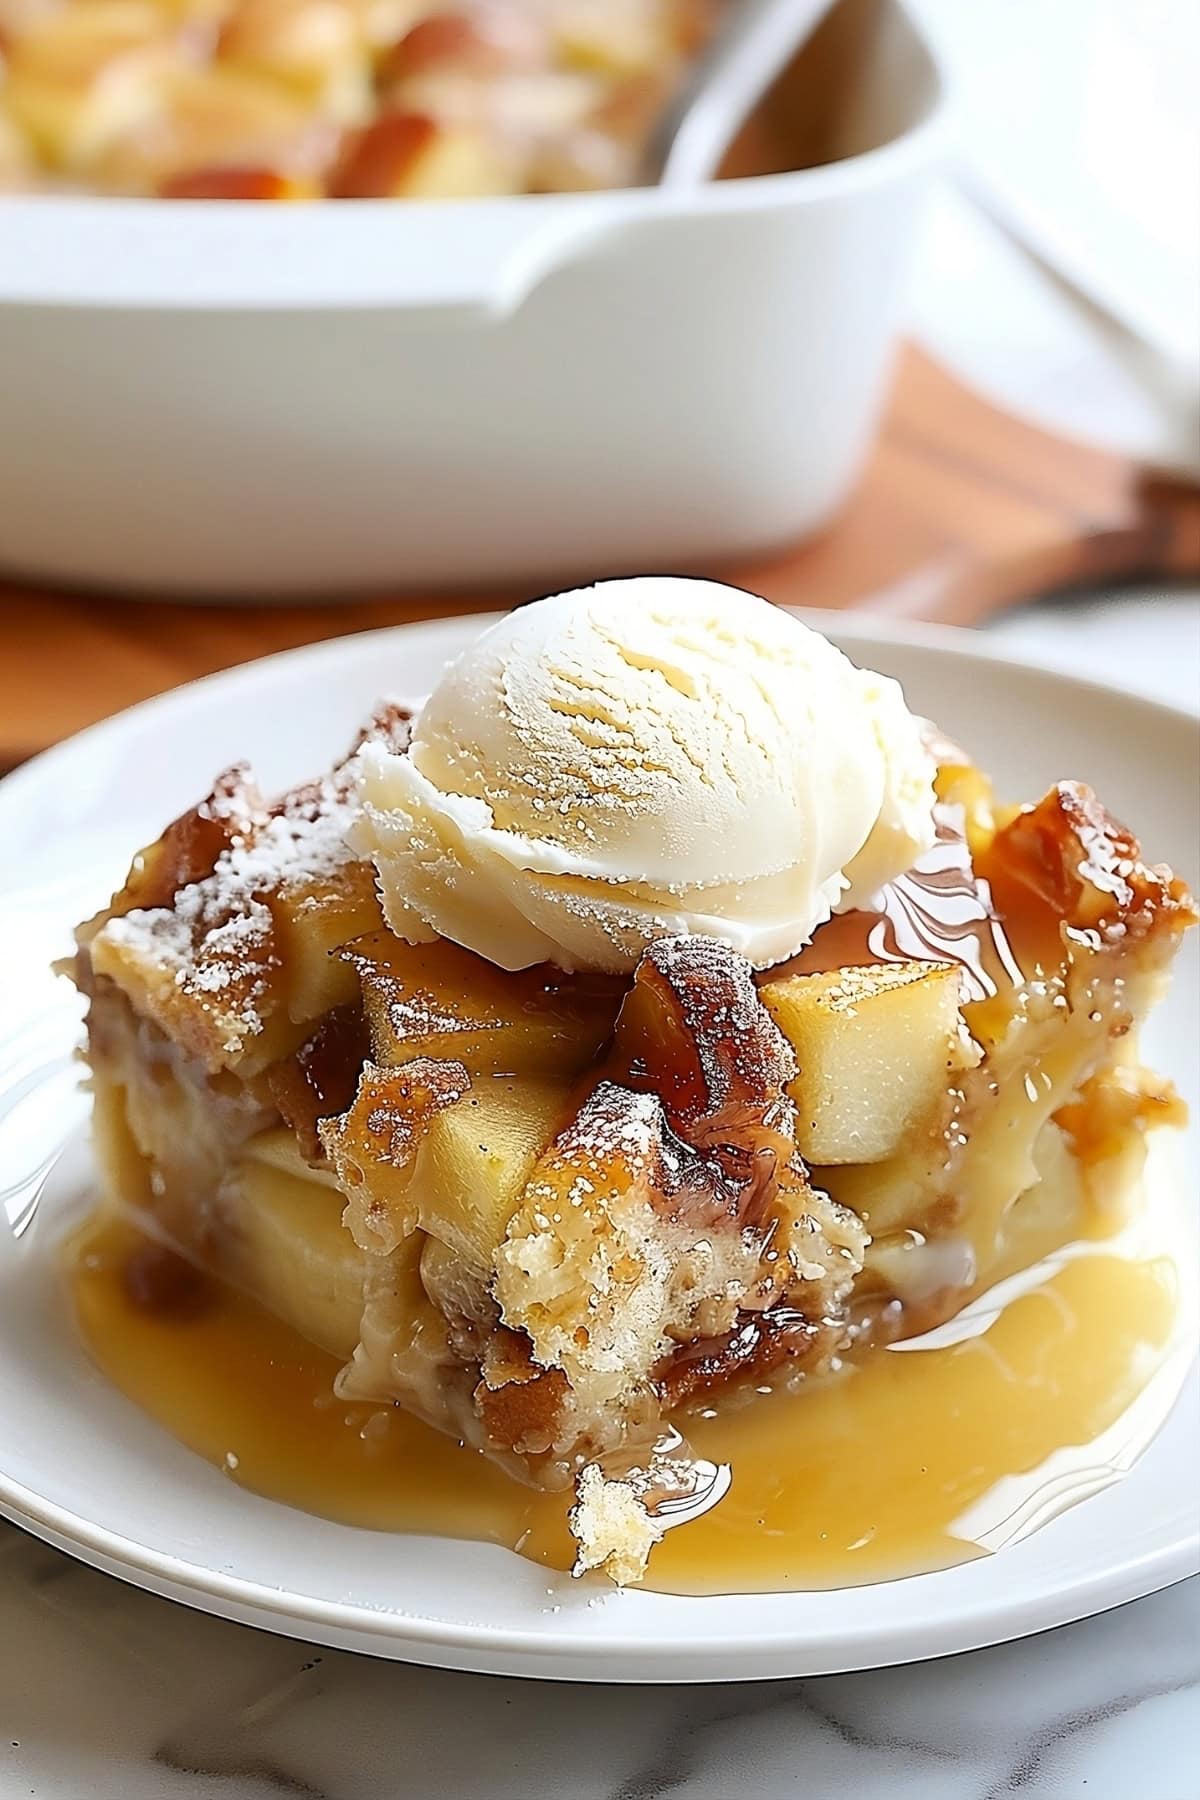 Apple pie bread pudding served in a white plate garnished with vanilla ice cream.